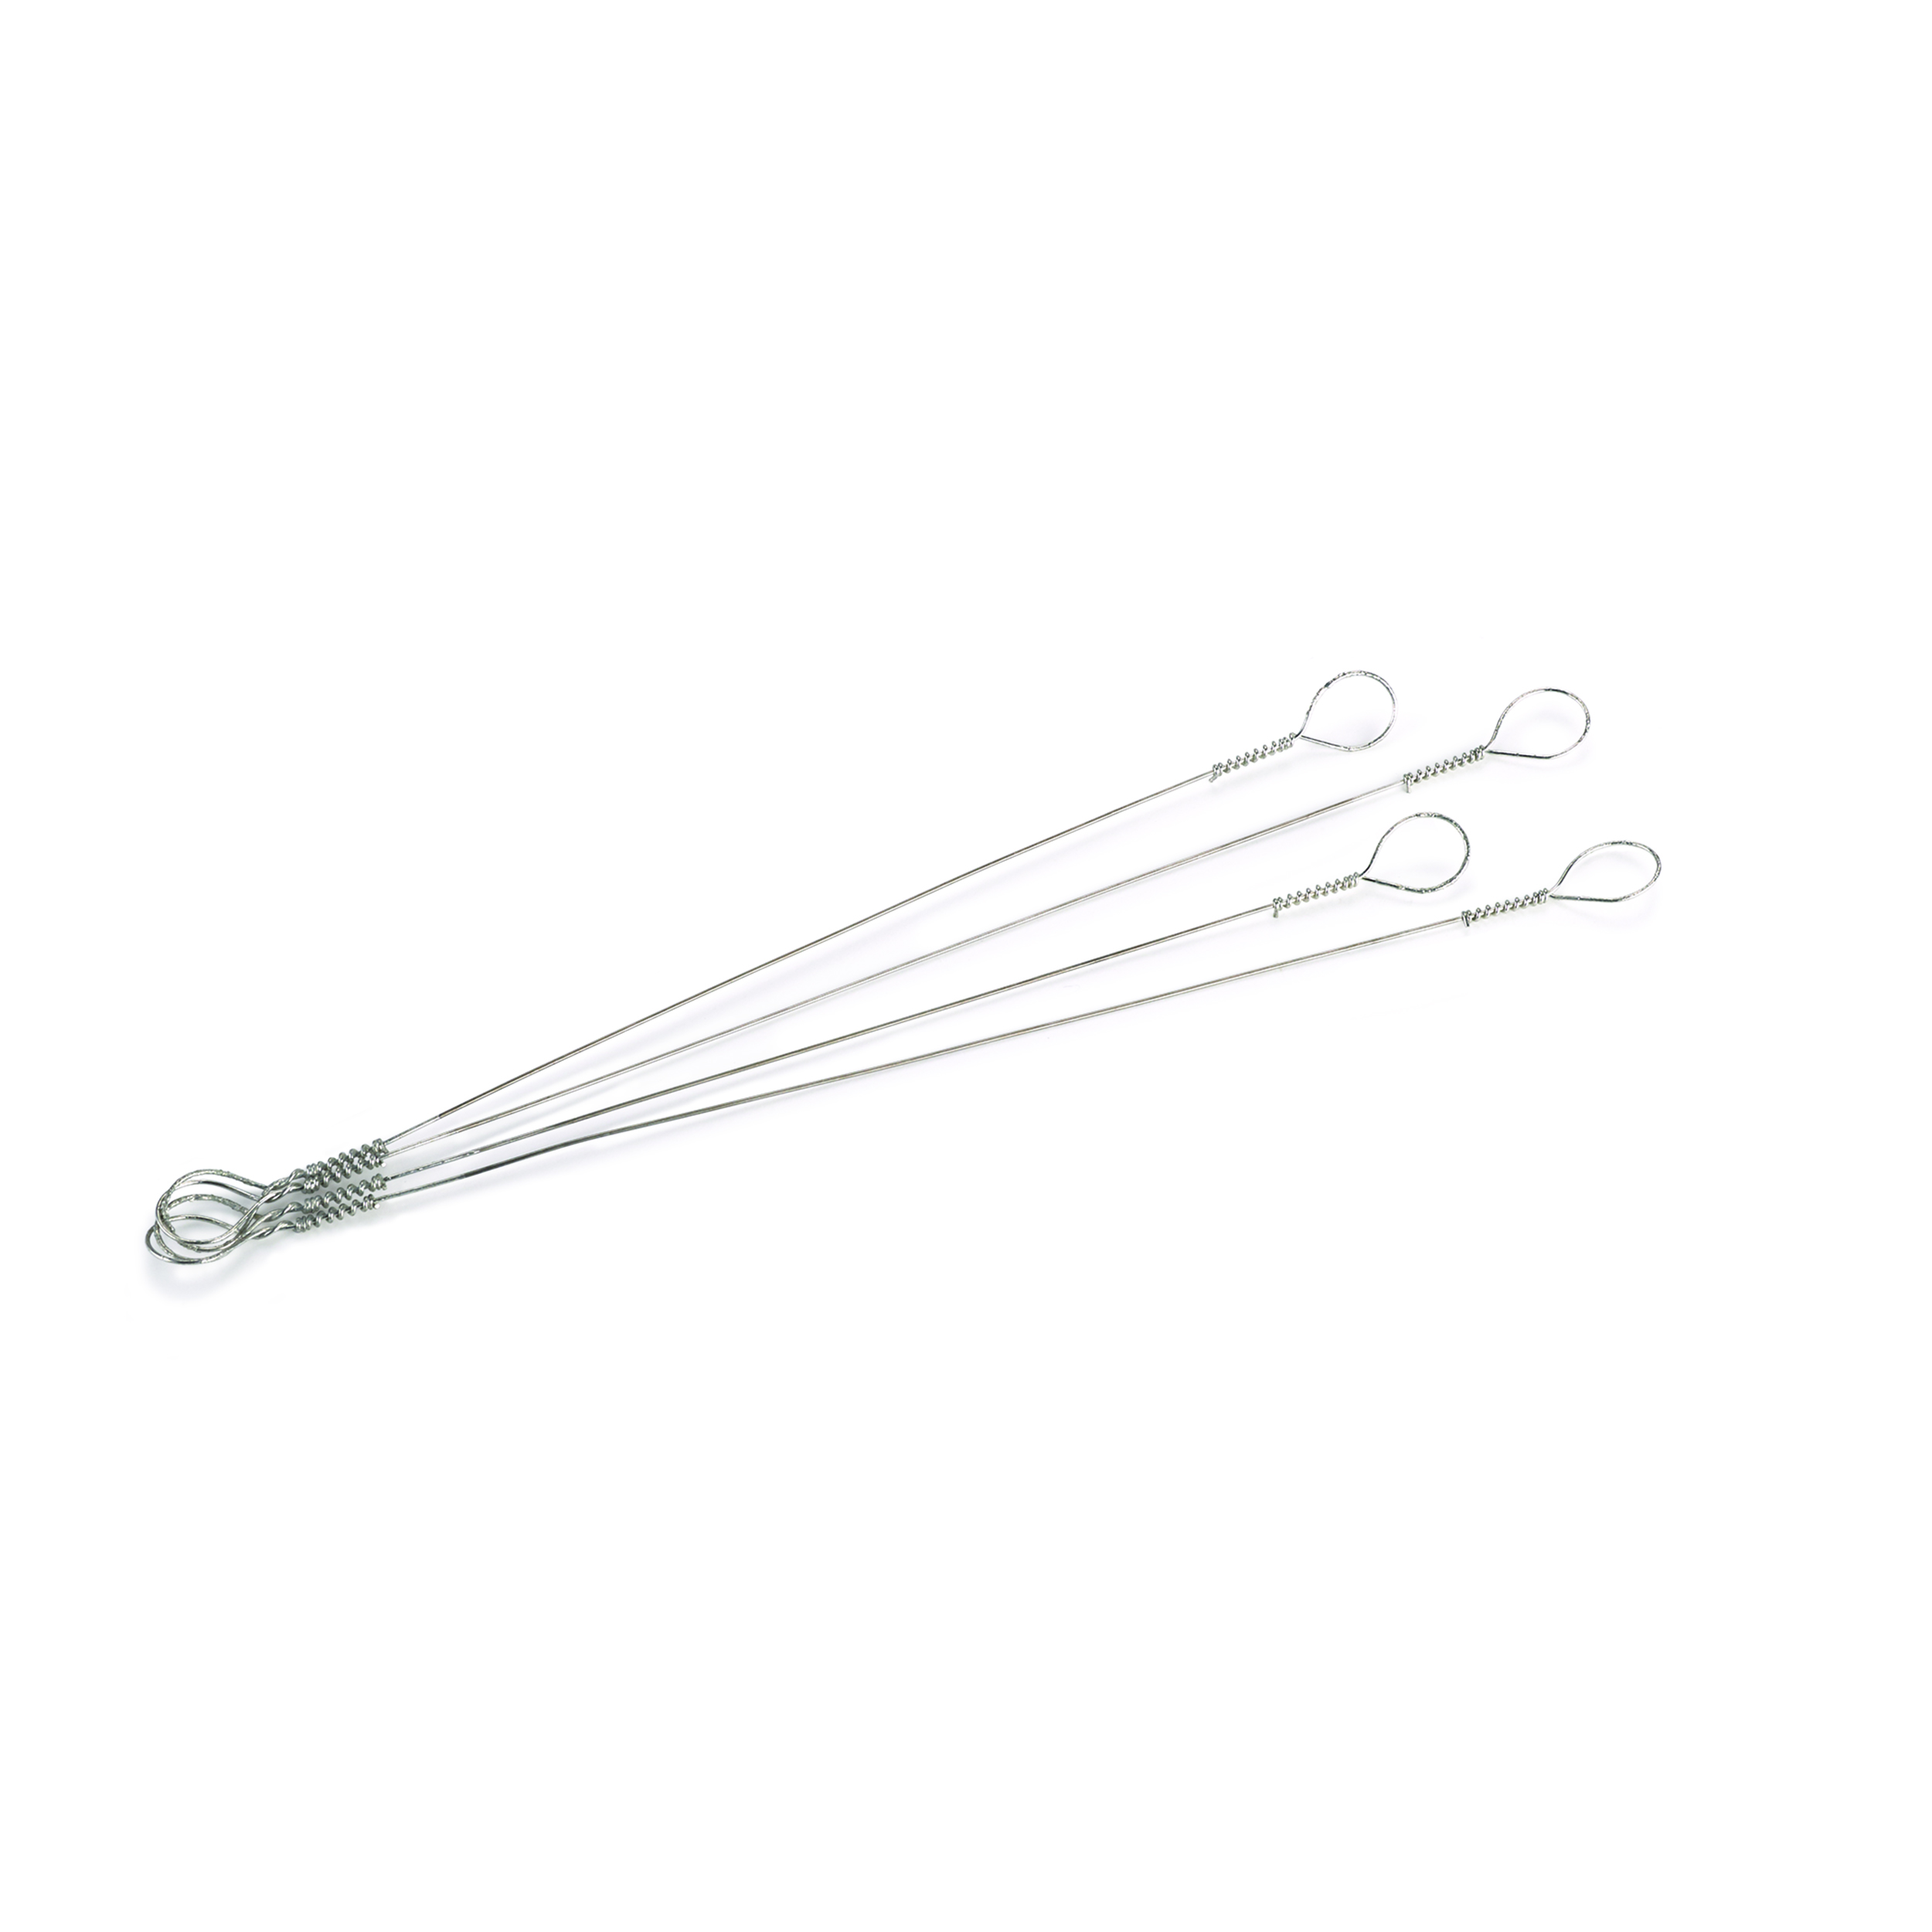 Cheese Slicer Kit Replacement Wire 4-piece